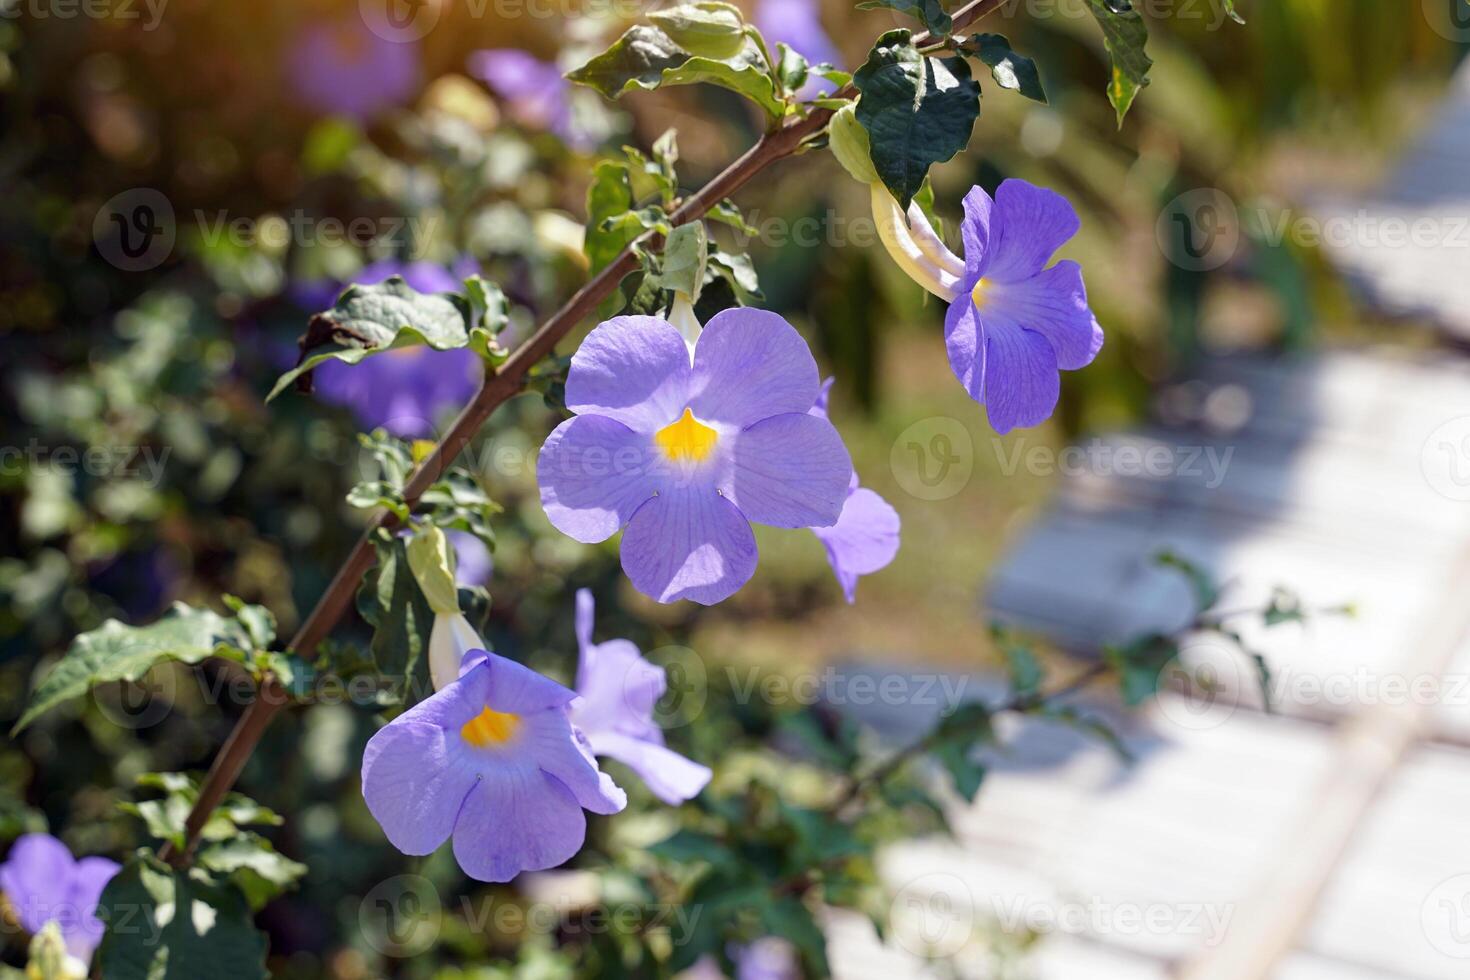 King's Mantle, purple, semi-climbing shrub, trumpet-shaped flowers, pale yellow petals at the base, 5 separated petals at the end, bluish-purple and white, blooming throughout the year. photo